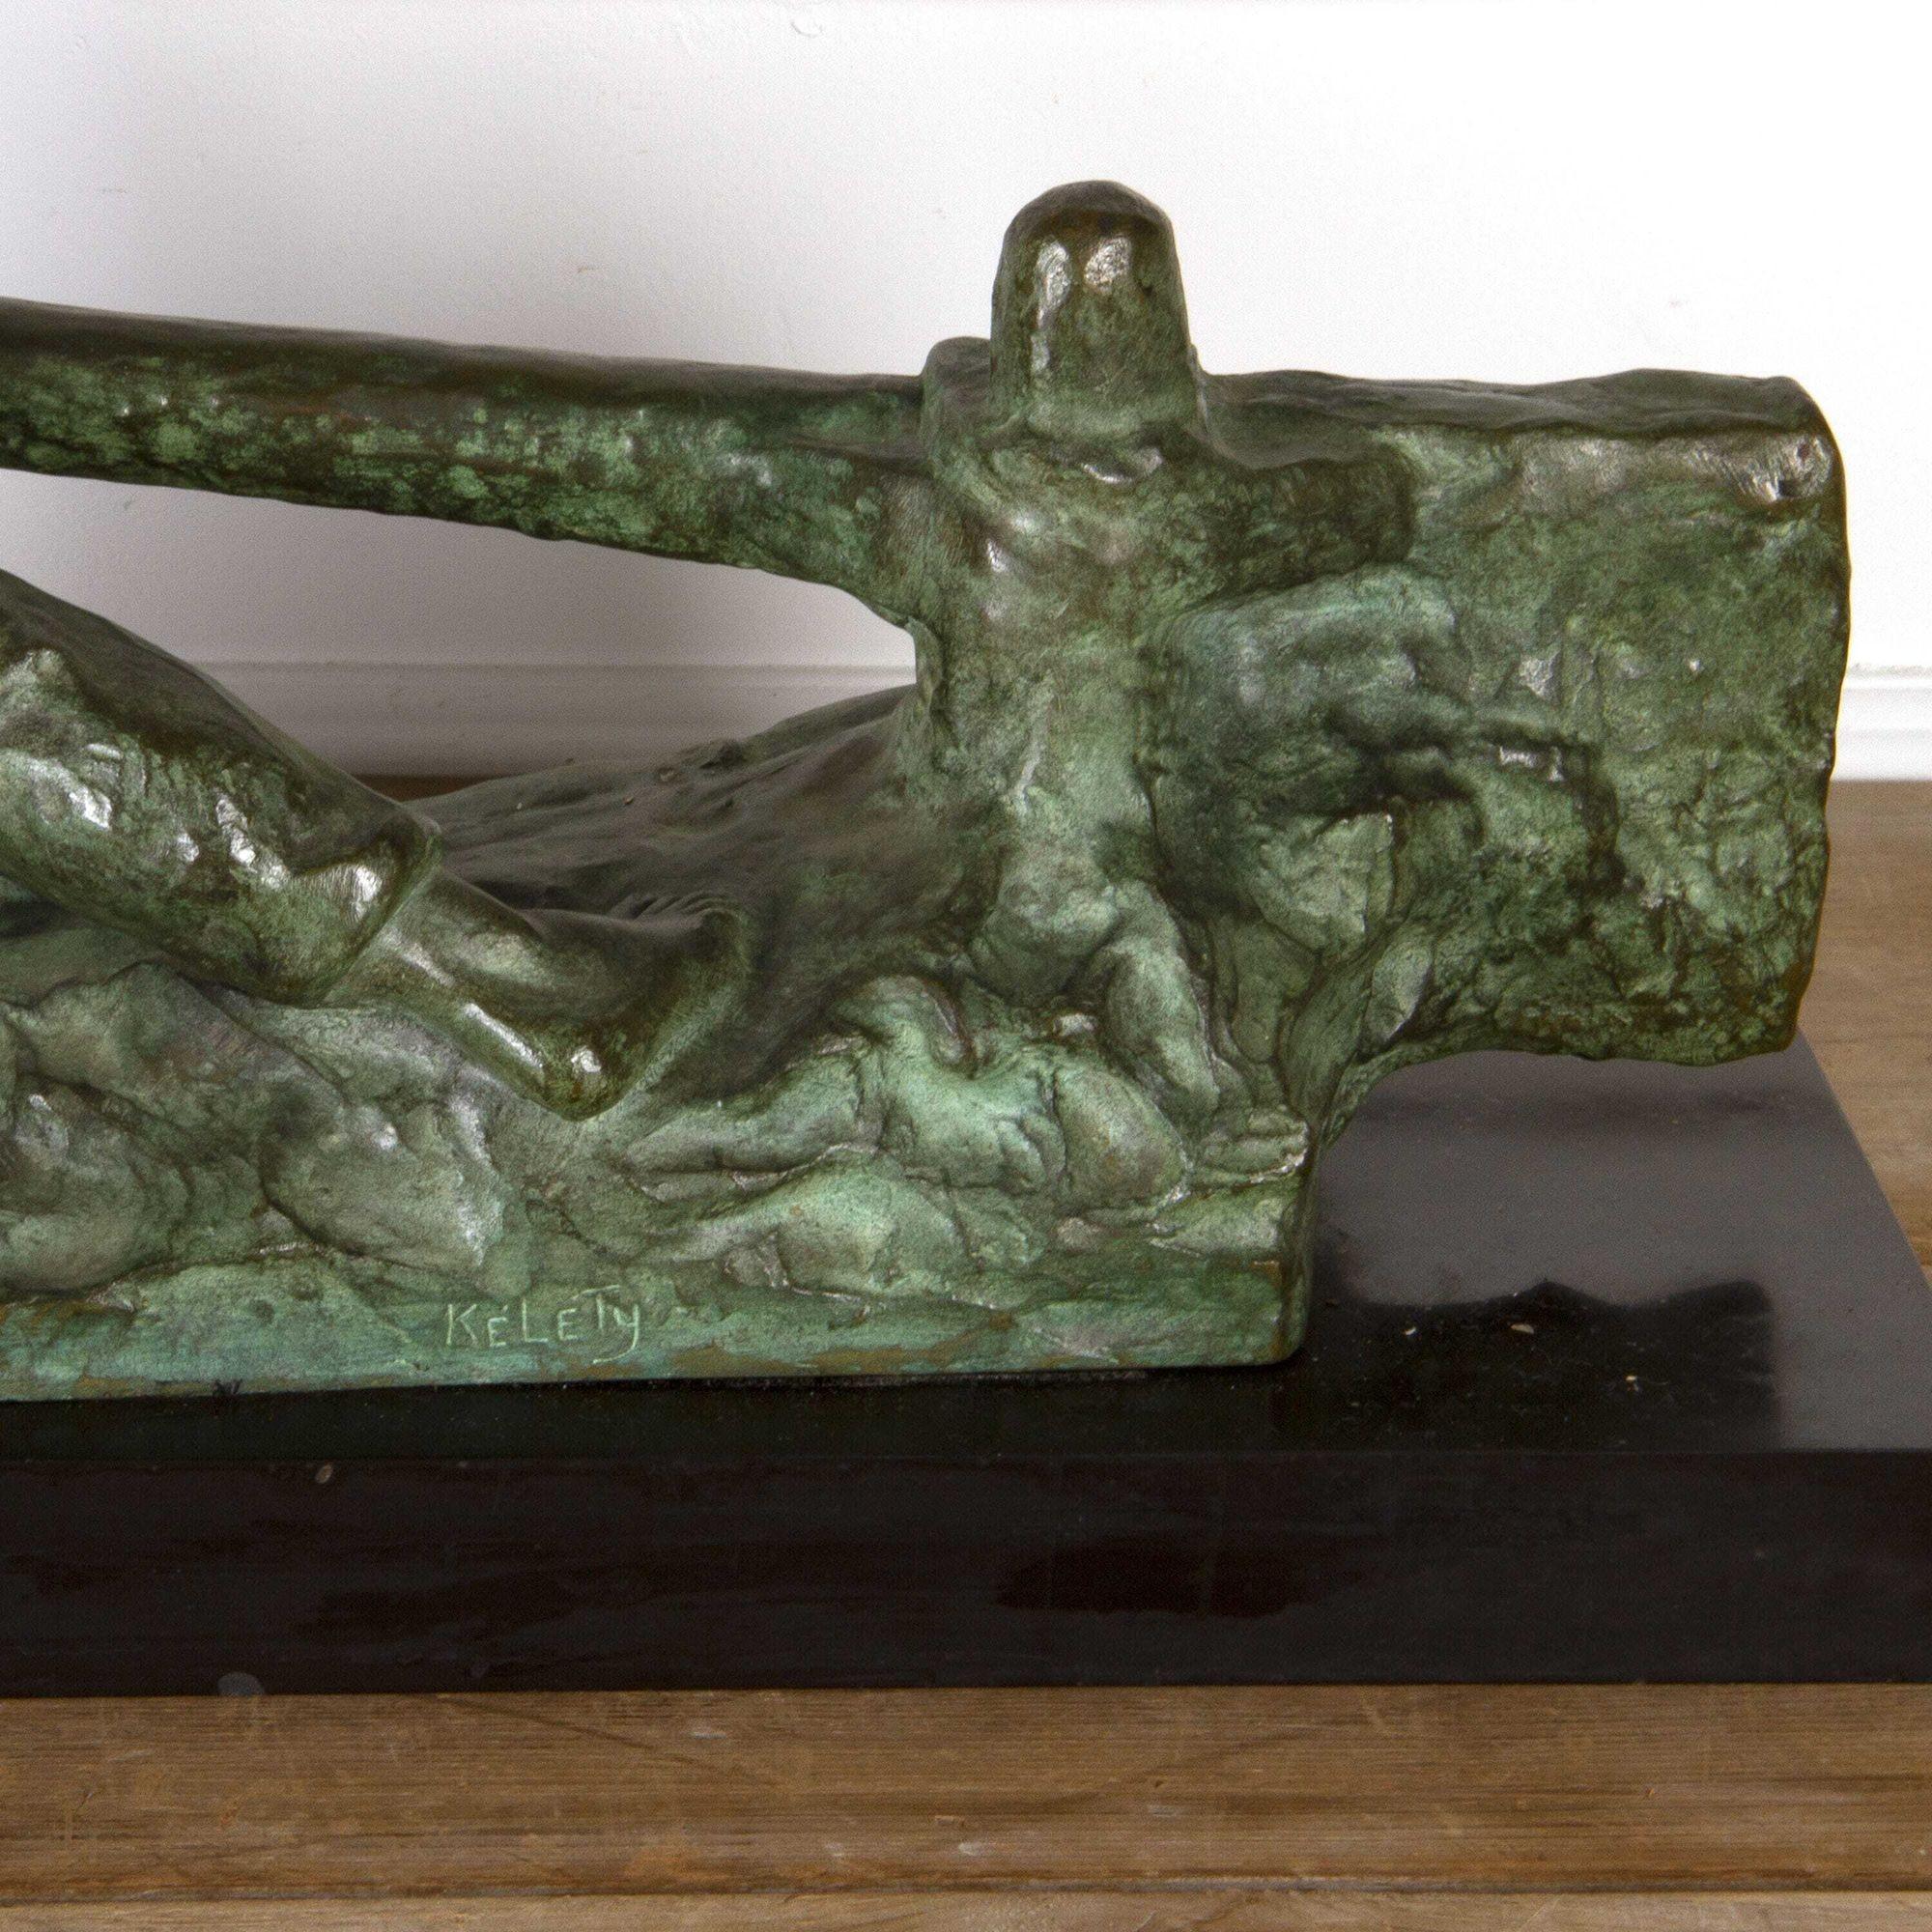 Fabulous Art Deco bronze sculpture by Alexander Kelety, circa 1930. 

Alexander Kelety was a Hungarian sculptor during the 20th Century. He was known for his bronze and ivory figurines. In his creations, Alexander often represented animals as well